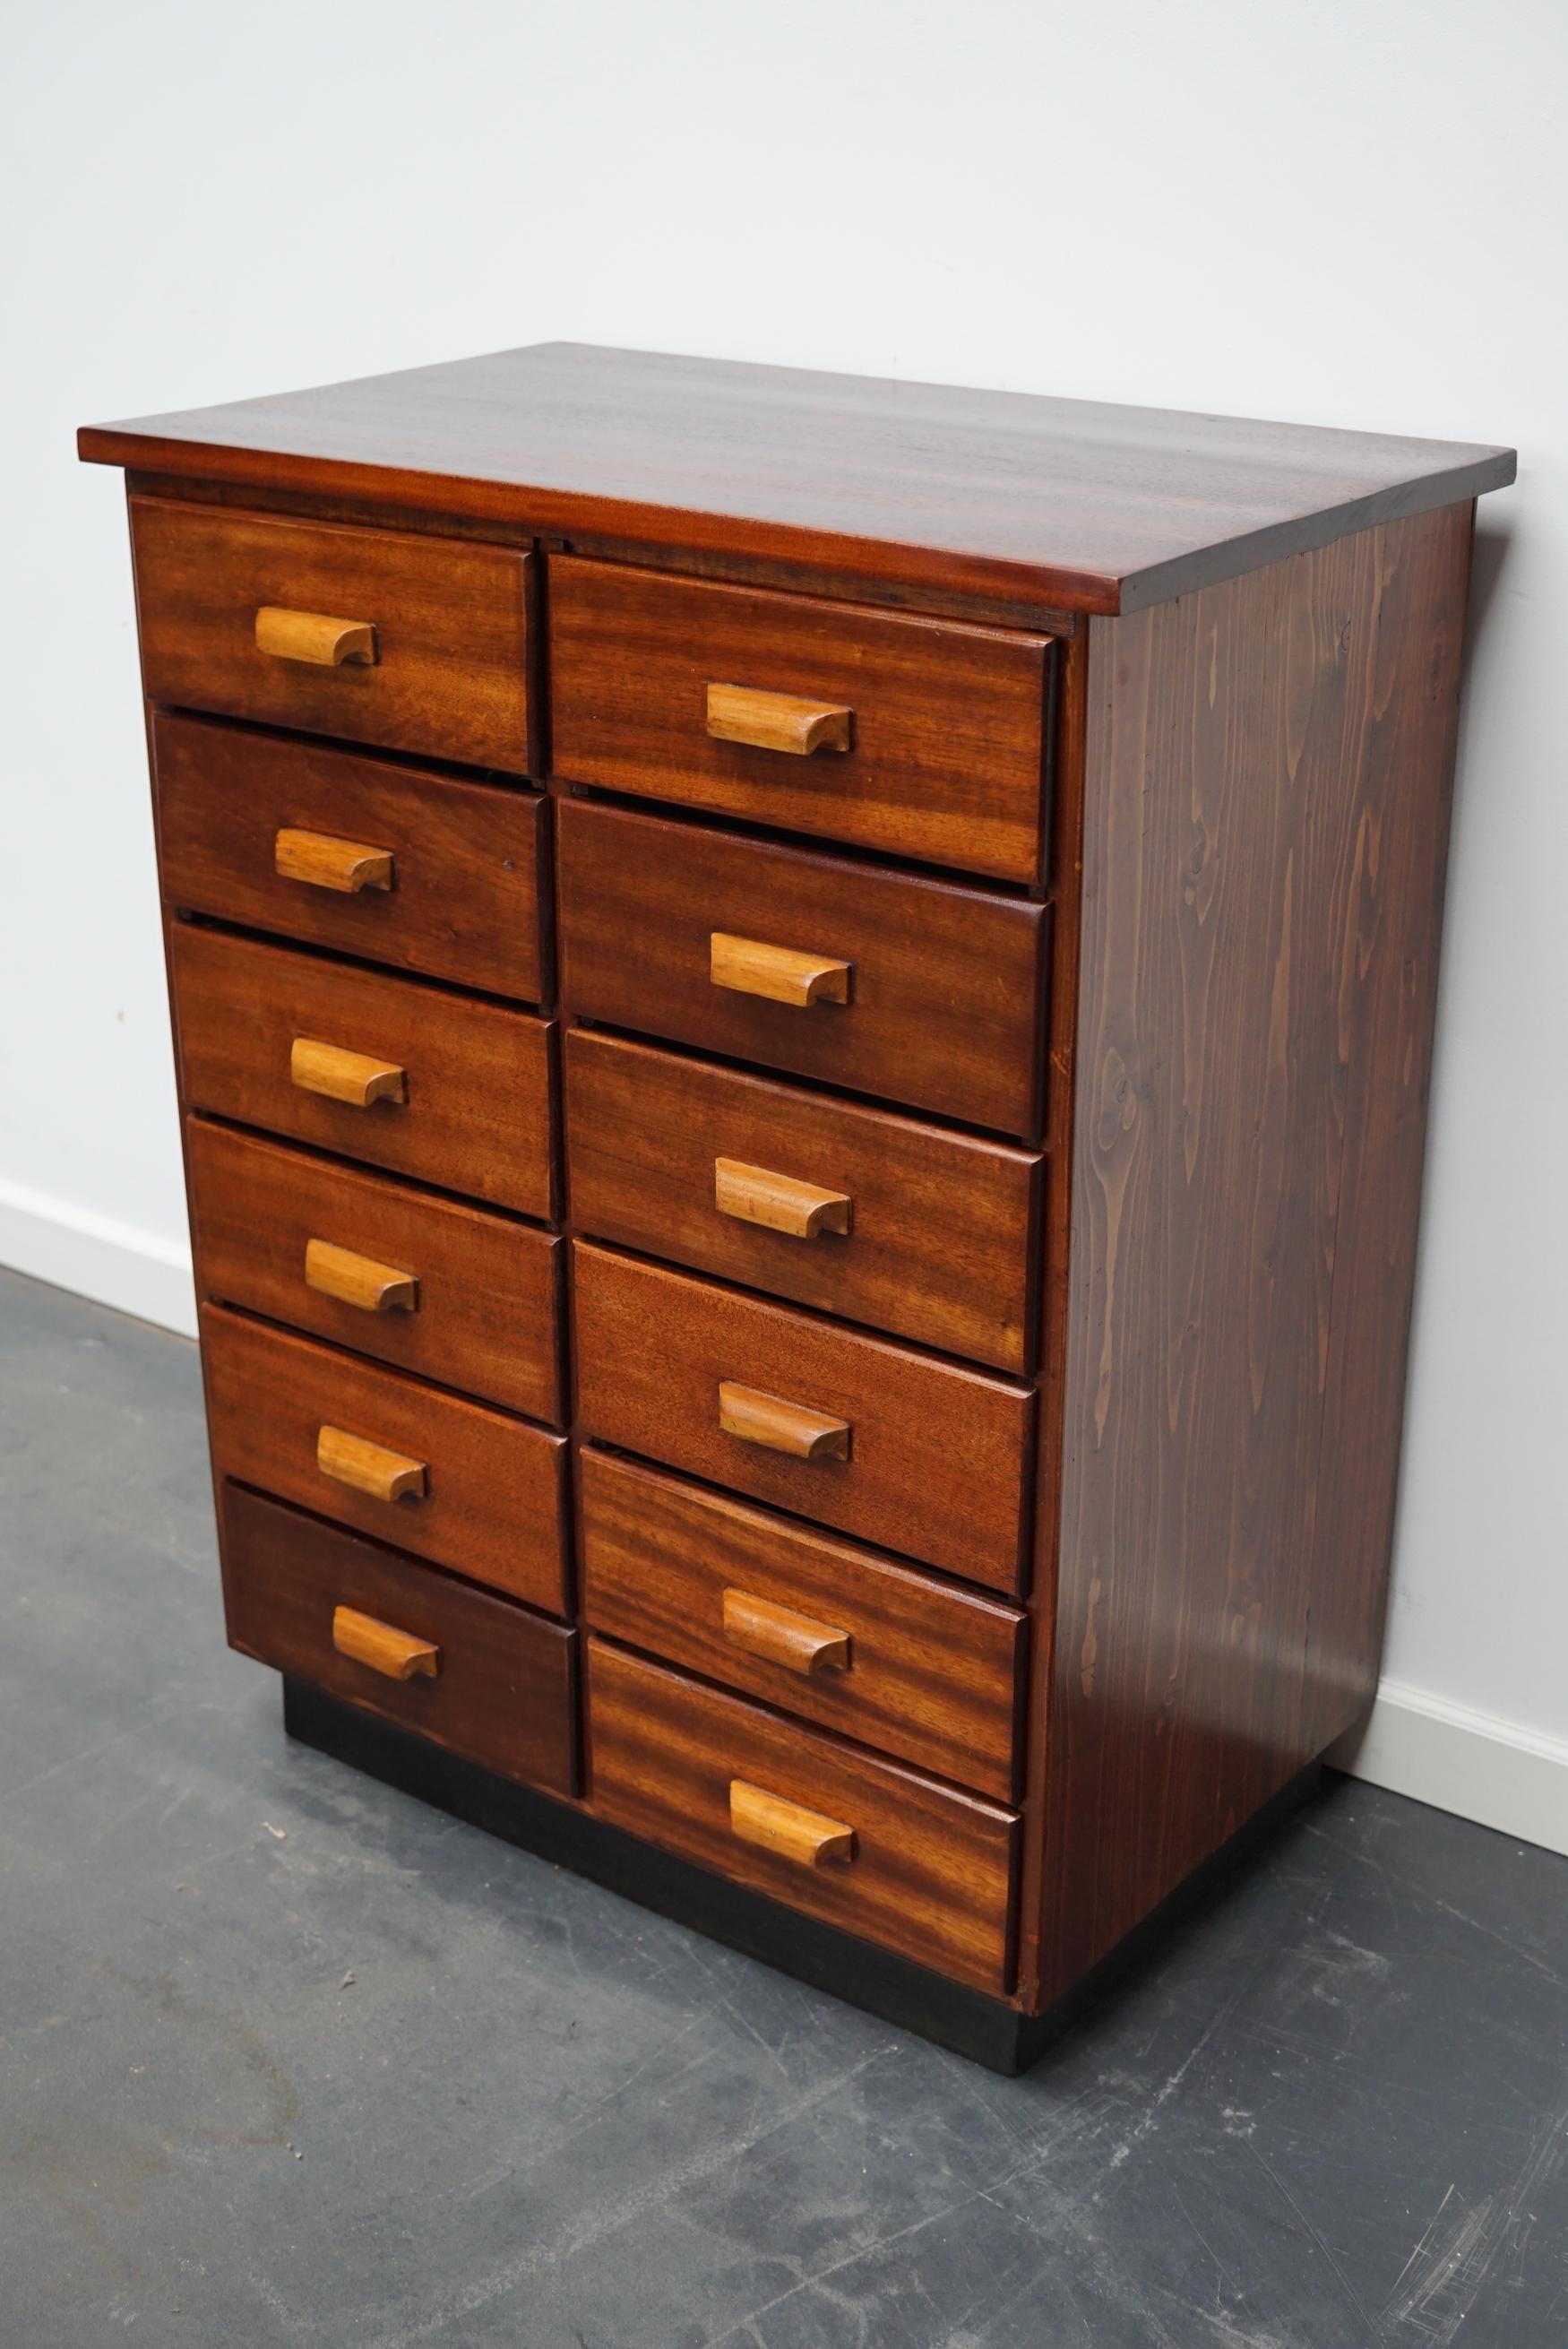 This cabinet was designed and made in circa 1930s in the Netherlands. It features 12 drawers and is made of pine and mahogany with wooden handles. The cabinet is in a good vintage condition. The inside drawer measurements are DWH: 33 x 25 x 8.5 cm.